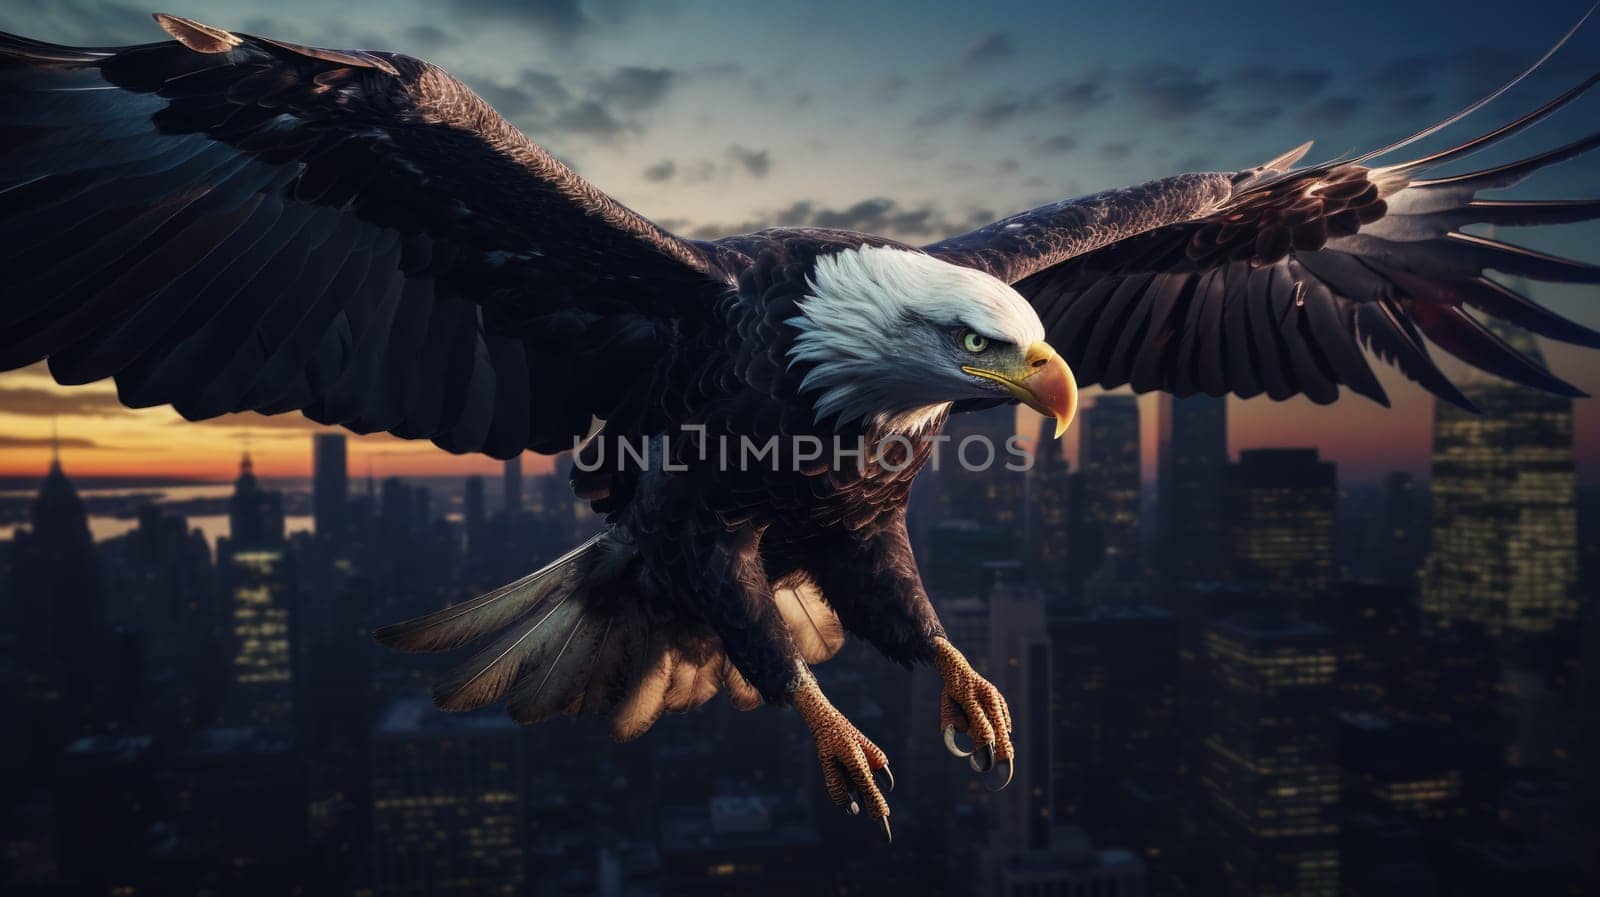 A bald eagle soars over city buildings. The bald eagle is the national symbol of the United States.